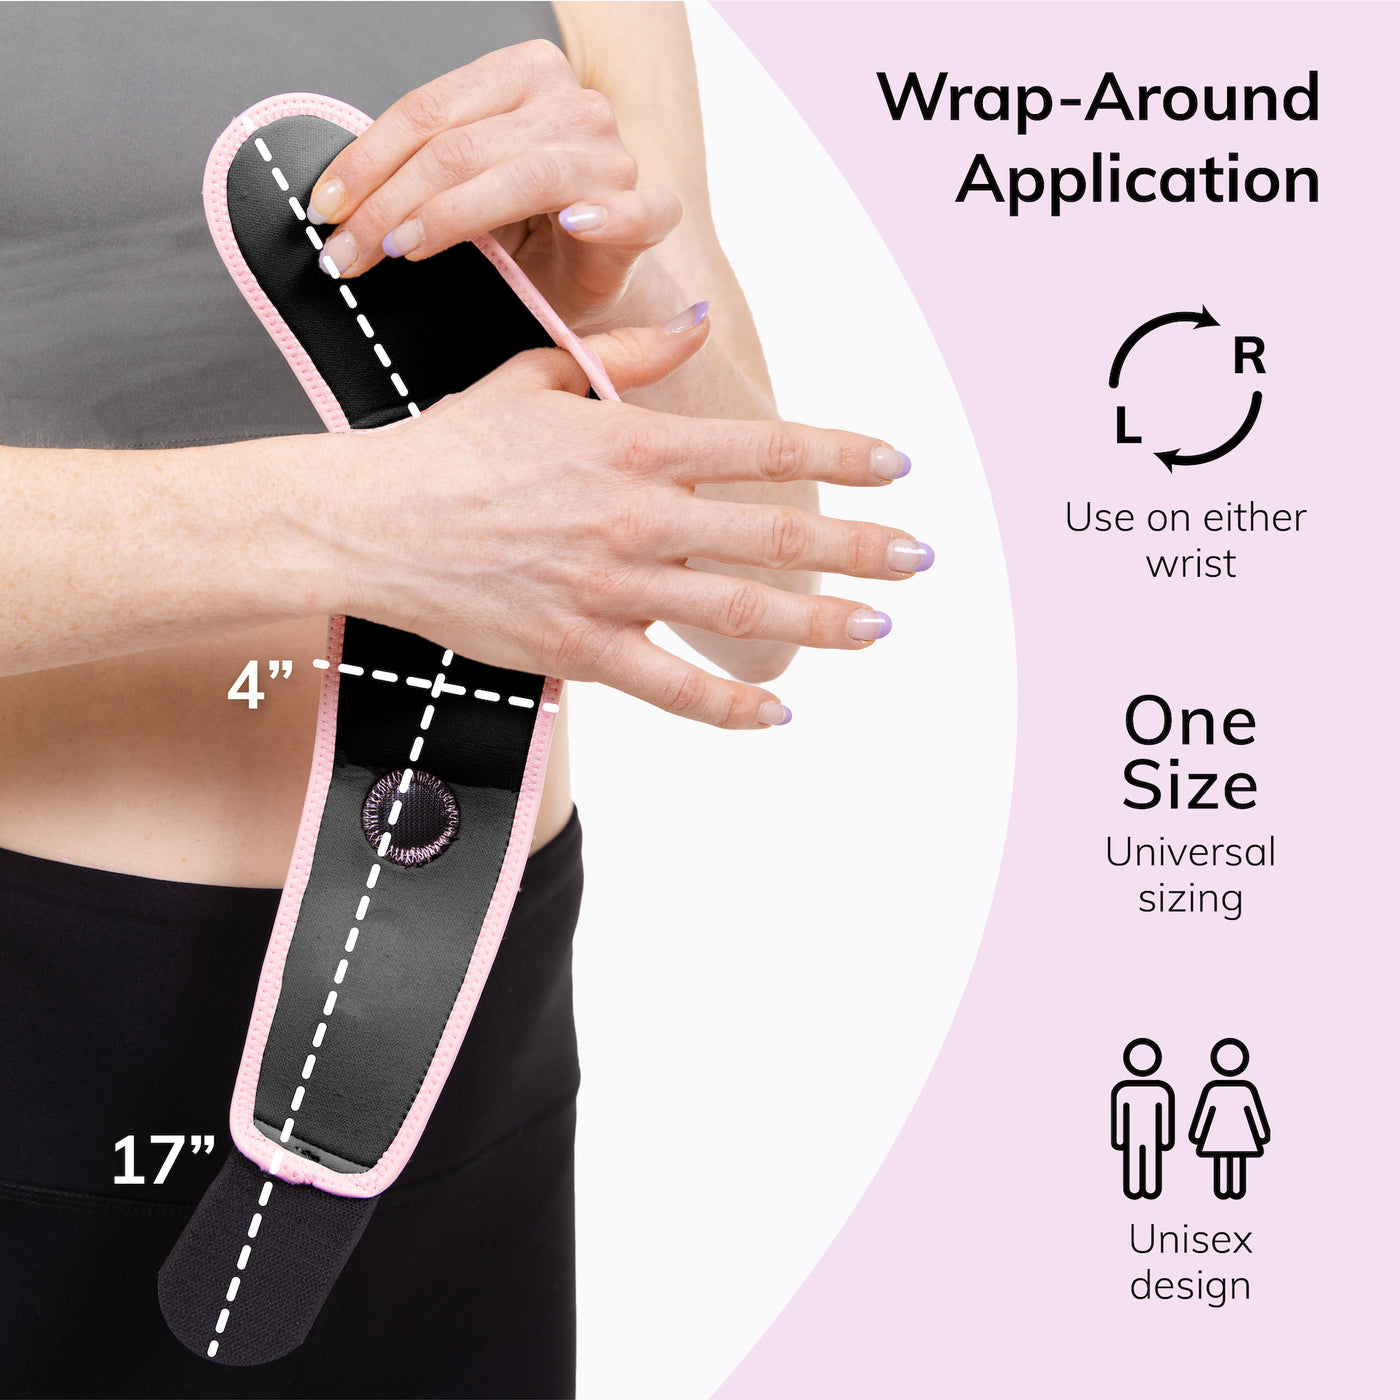 The postpartum wrist pain brace can be worn on the right or left hand to relieve mommy thumb